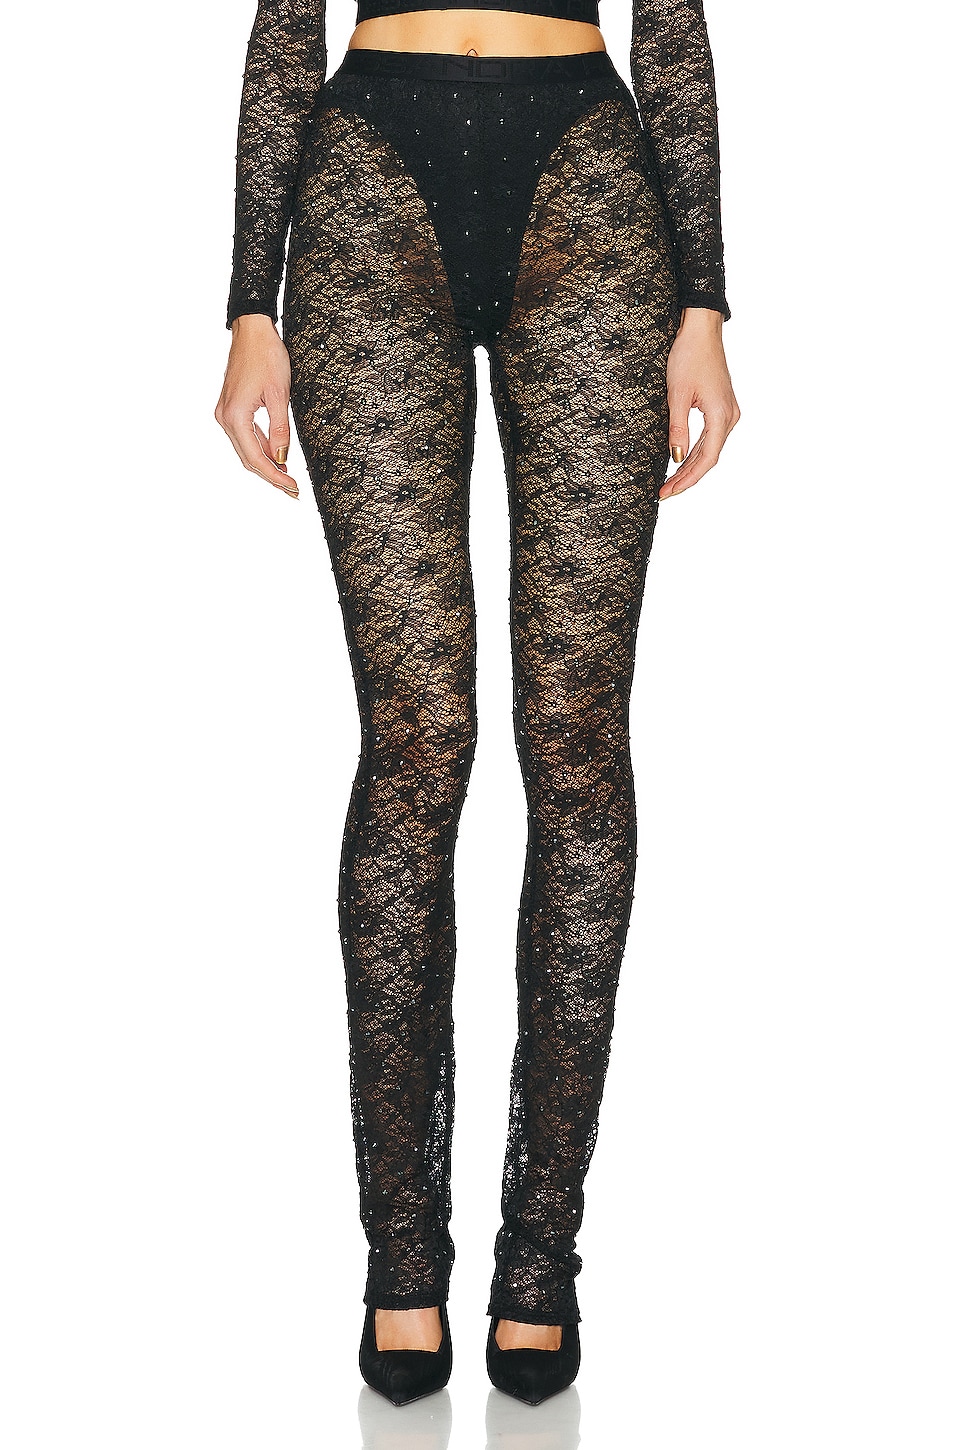 Image 1 of Alessandra Rich Stretch Lace Legging in Black